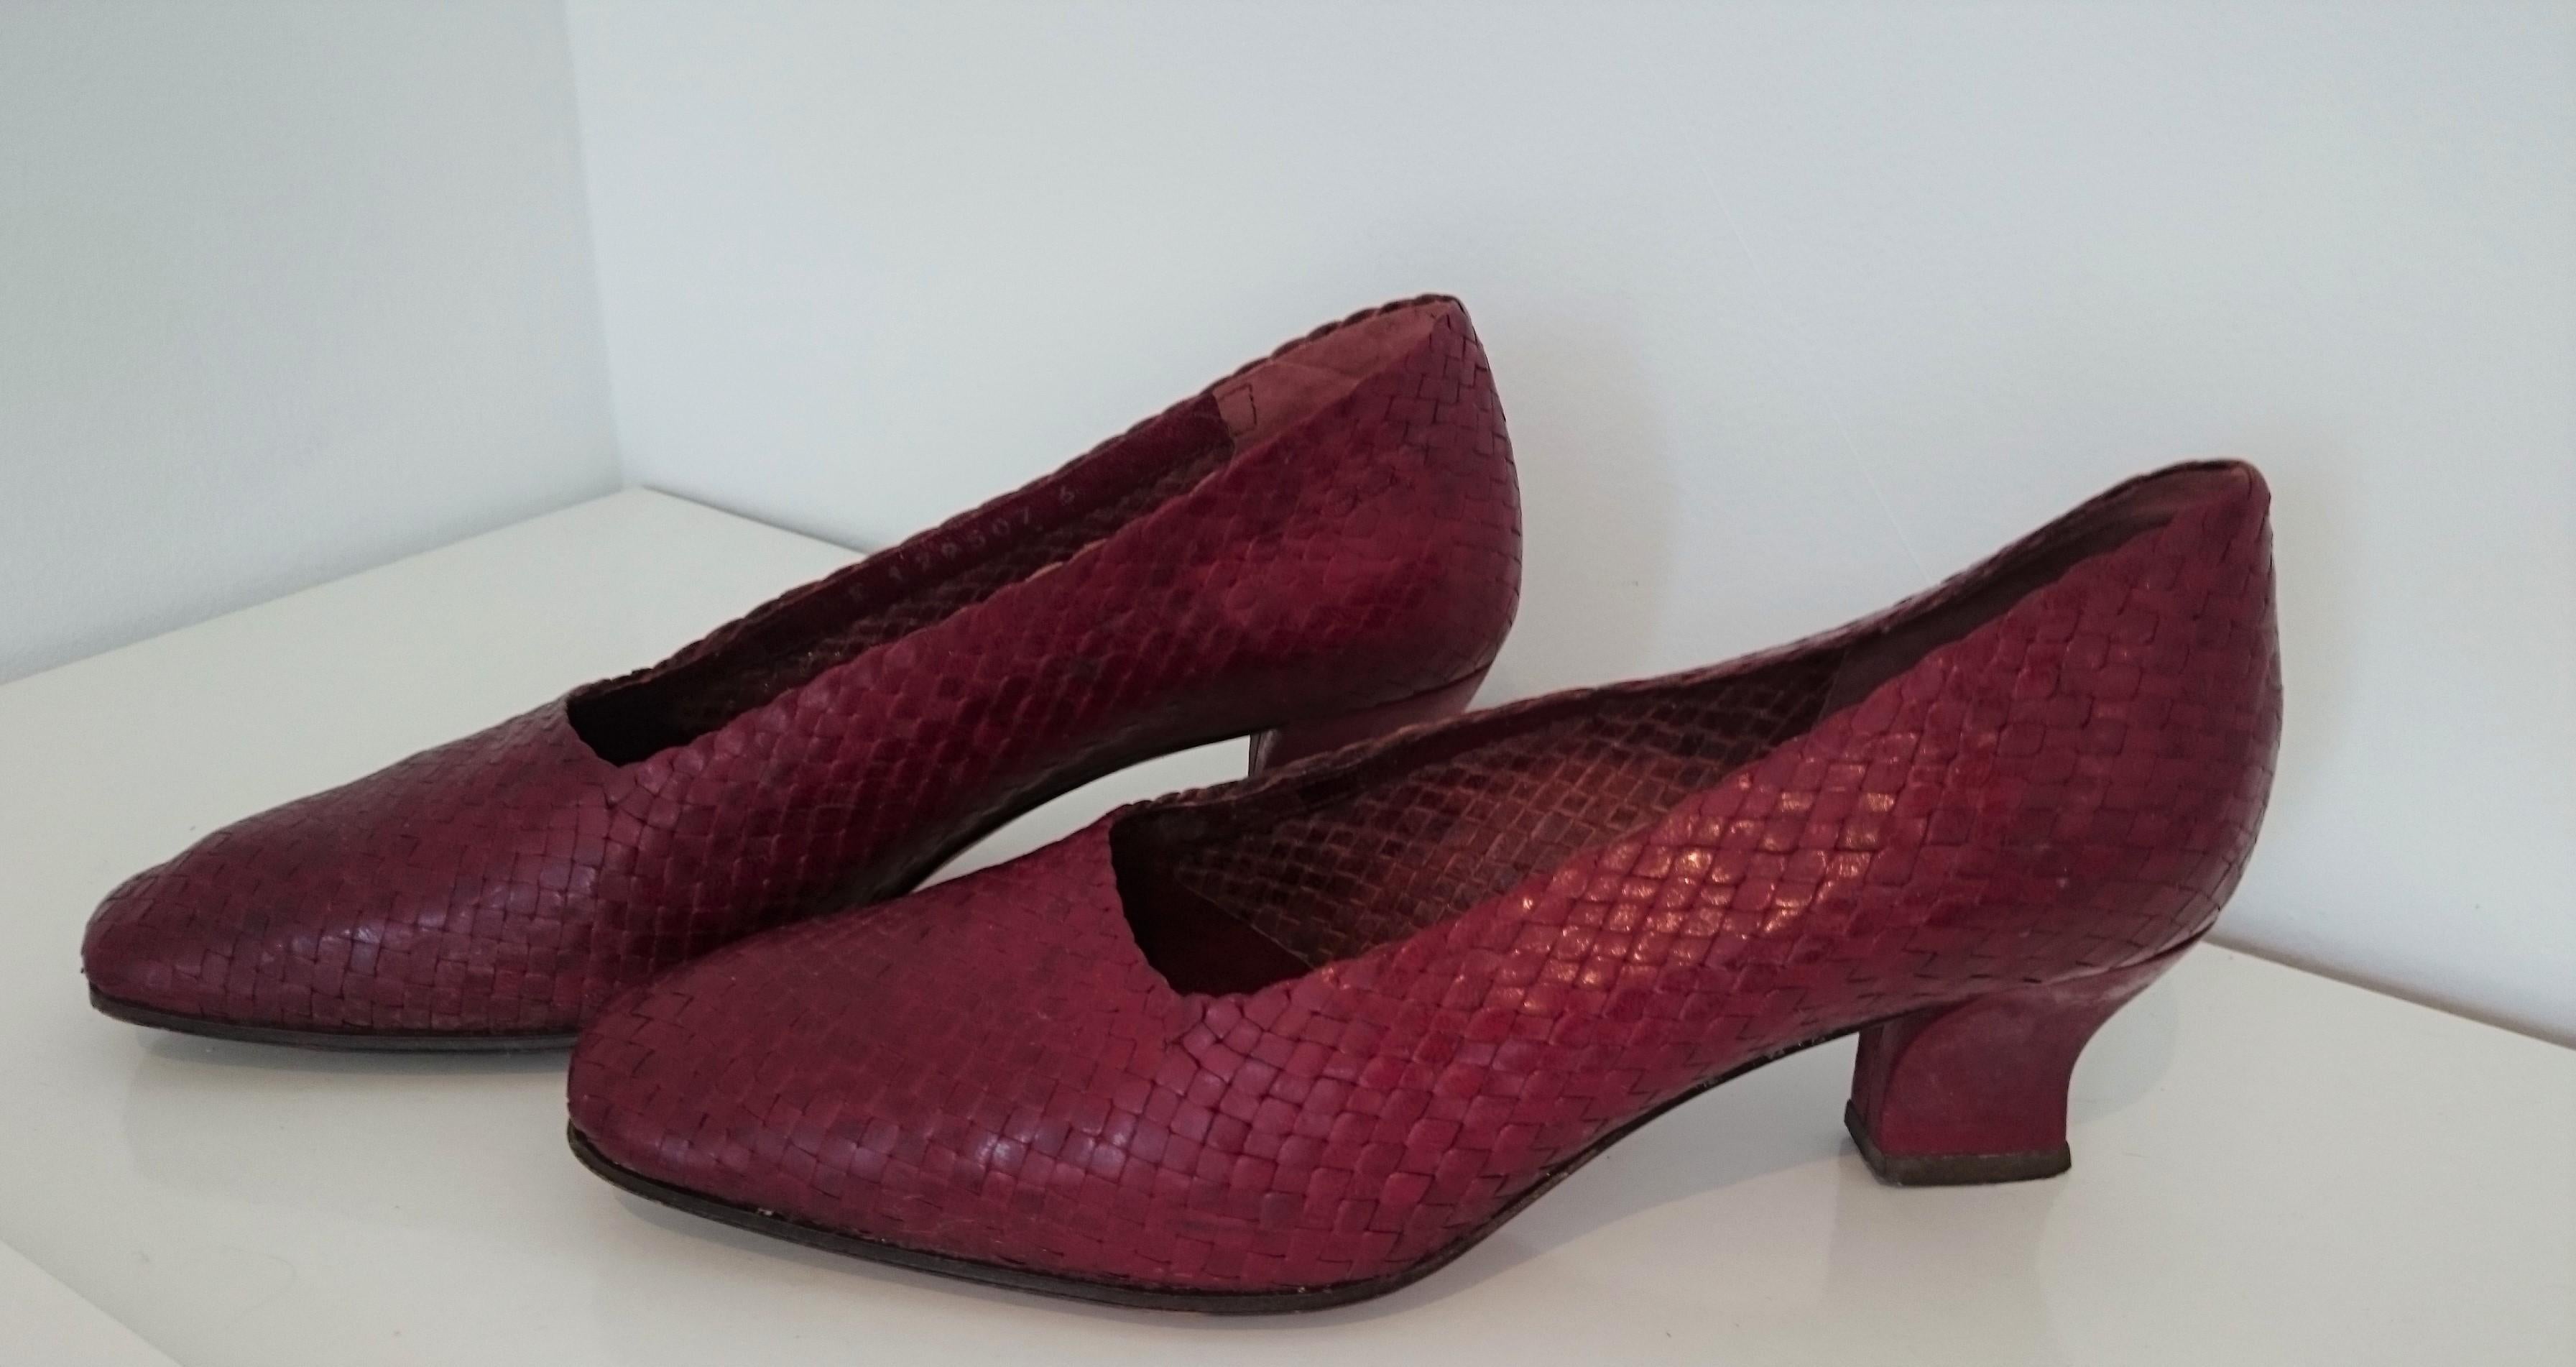 Stephane Kélian Heels with a beautiful and well crafted overlay leather design.
Color: Bordeaux
Heel height: 5 cm
Size: 9
Made in France